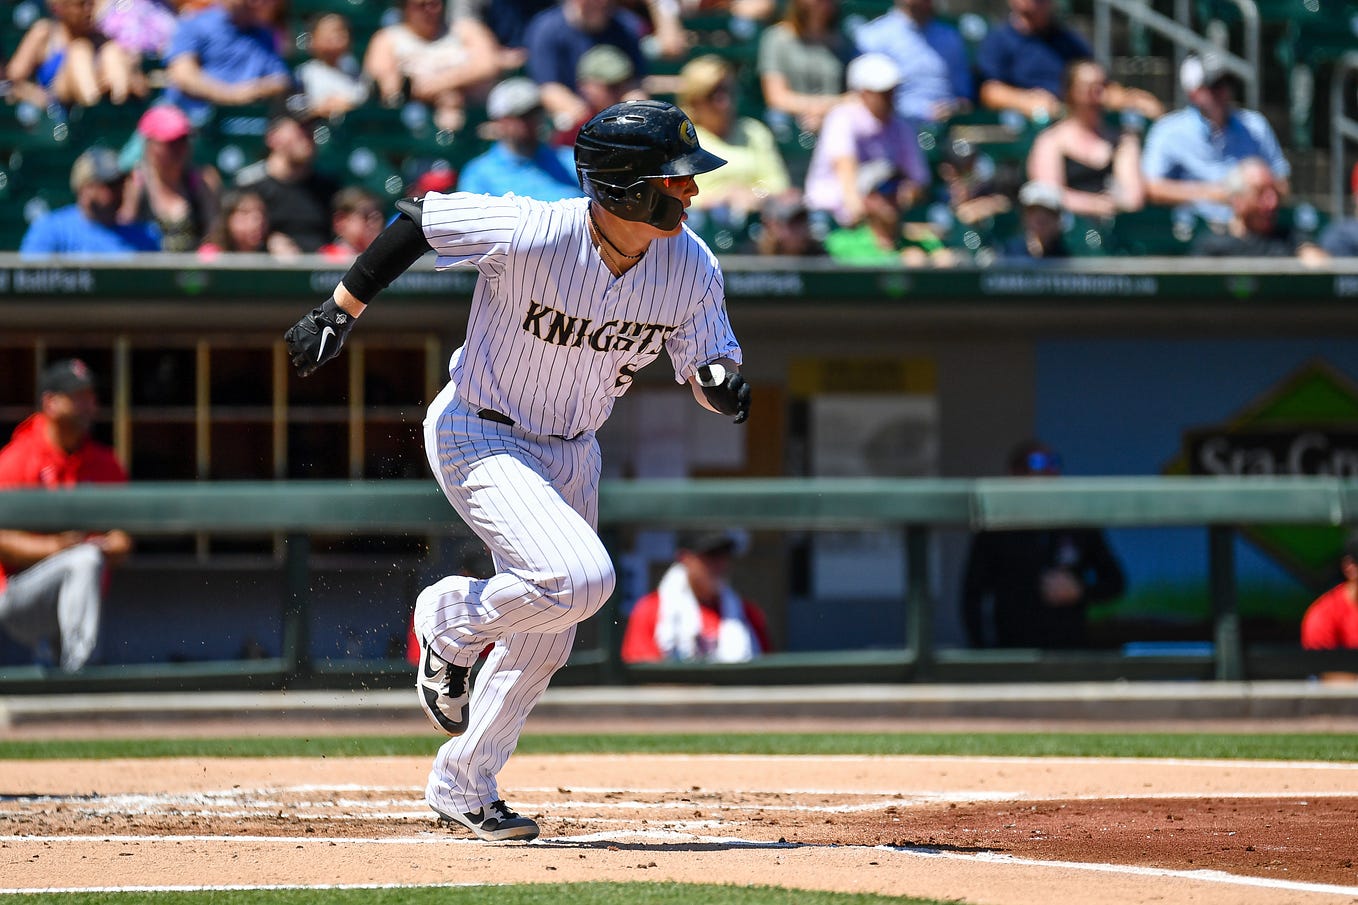 Lehigh Valley Iron Pigs vs Charlotte Knights live score & predictions